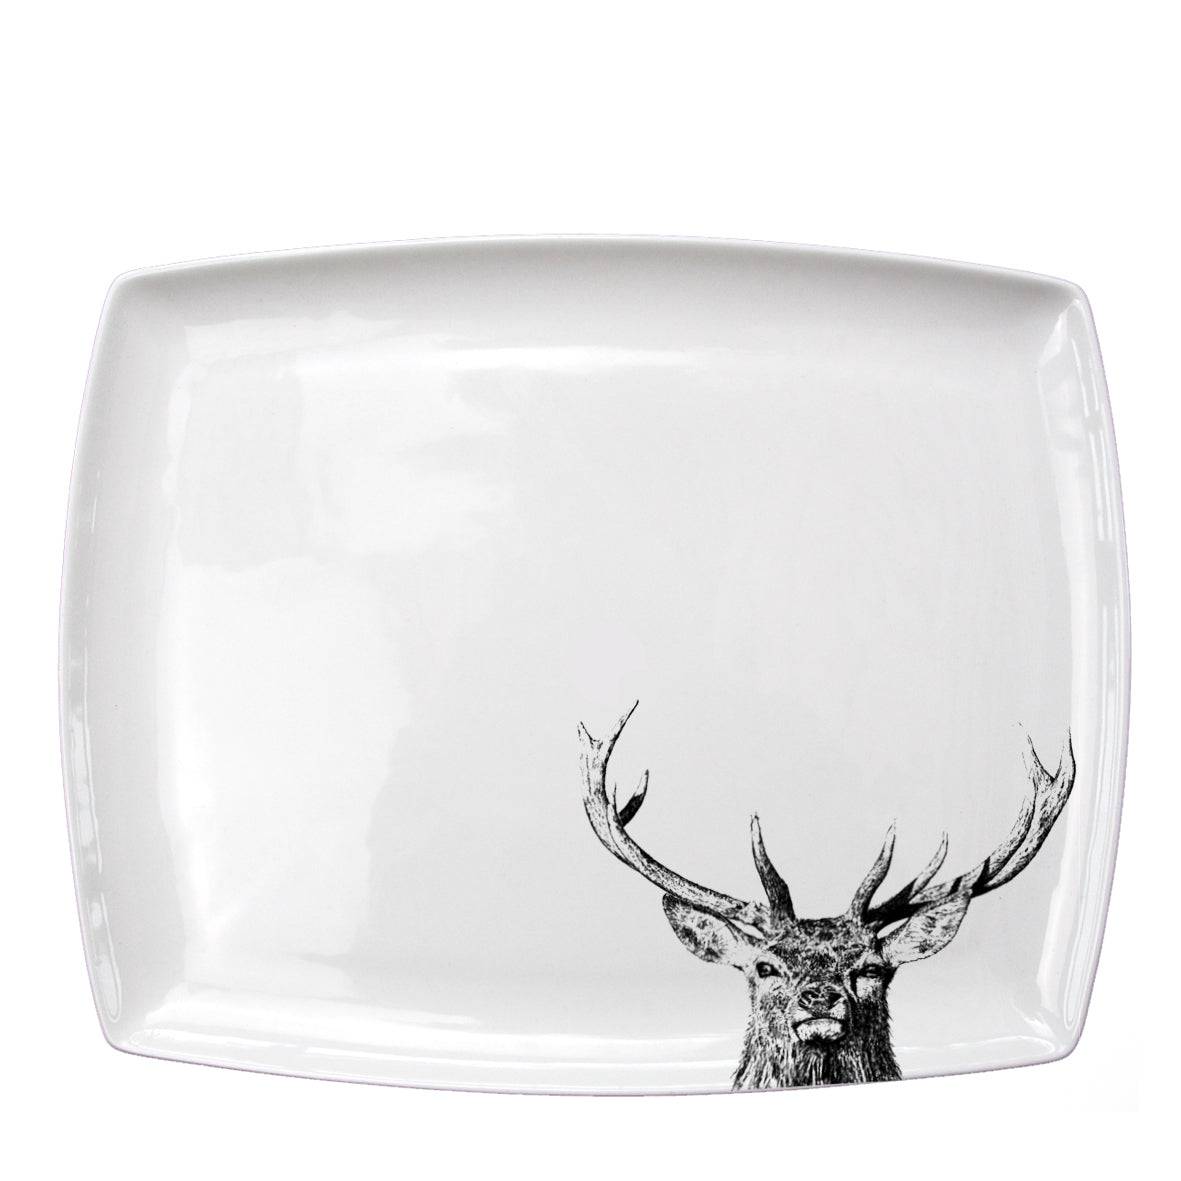 Majestic Stag Platter - Small for sale - Woodcock and Cavendish